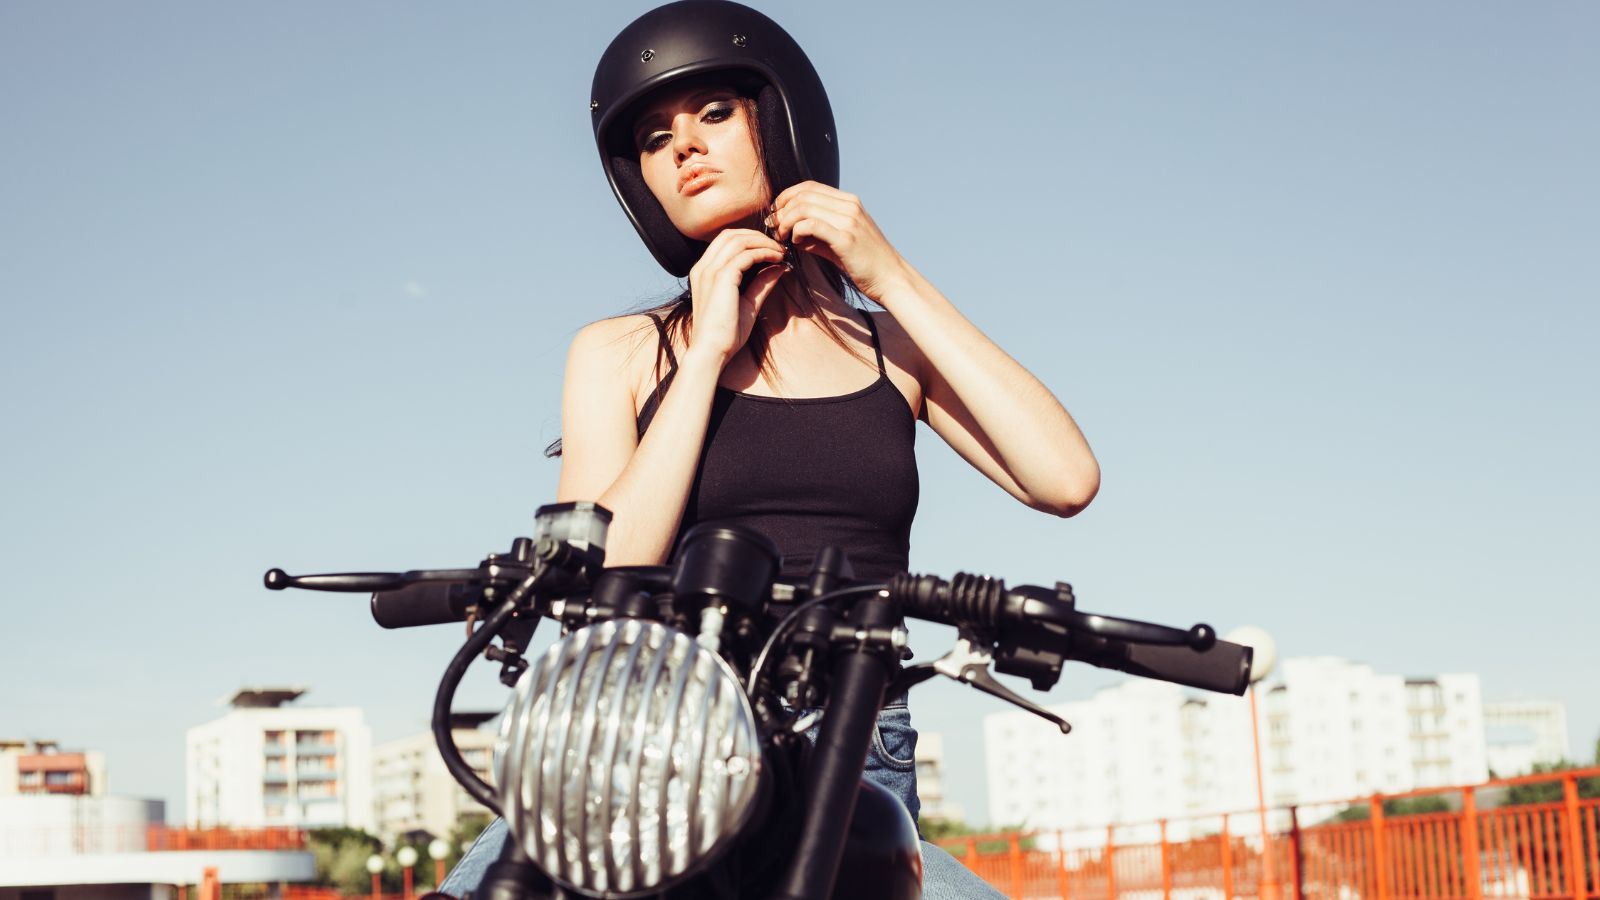 15 Ways to Boost Confidence on a Motorbike as a Woman